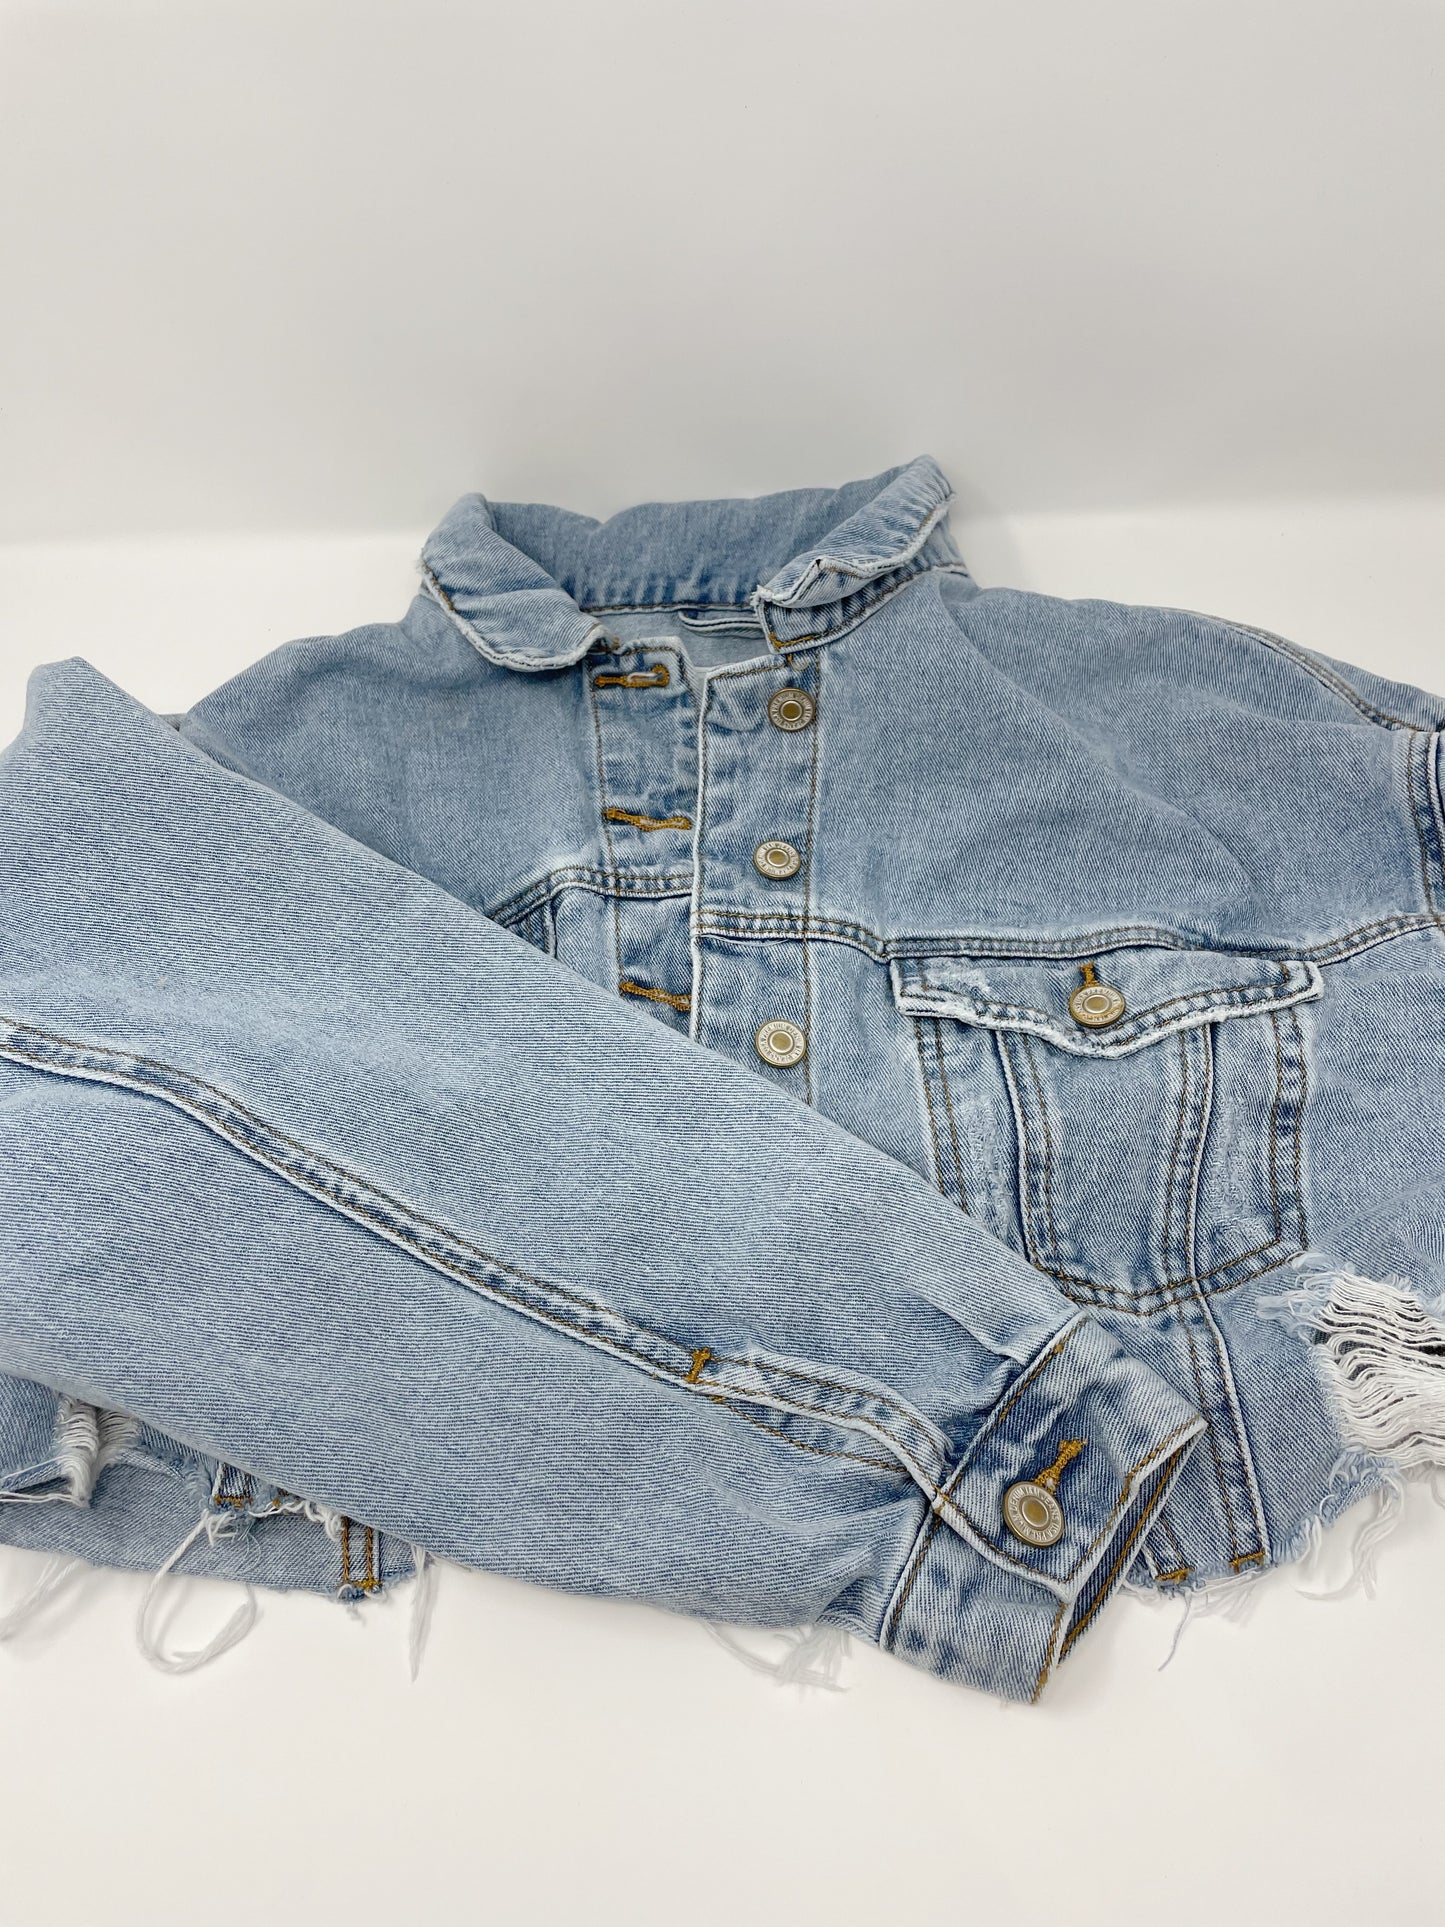 The Cropped Jean Jacket